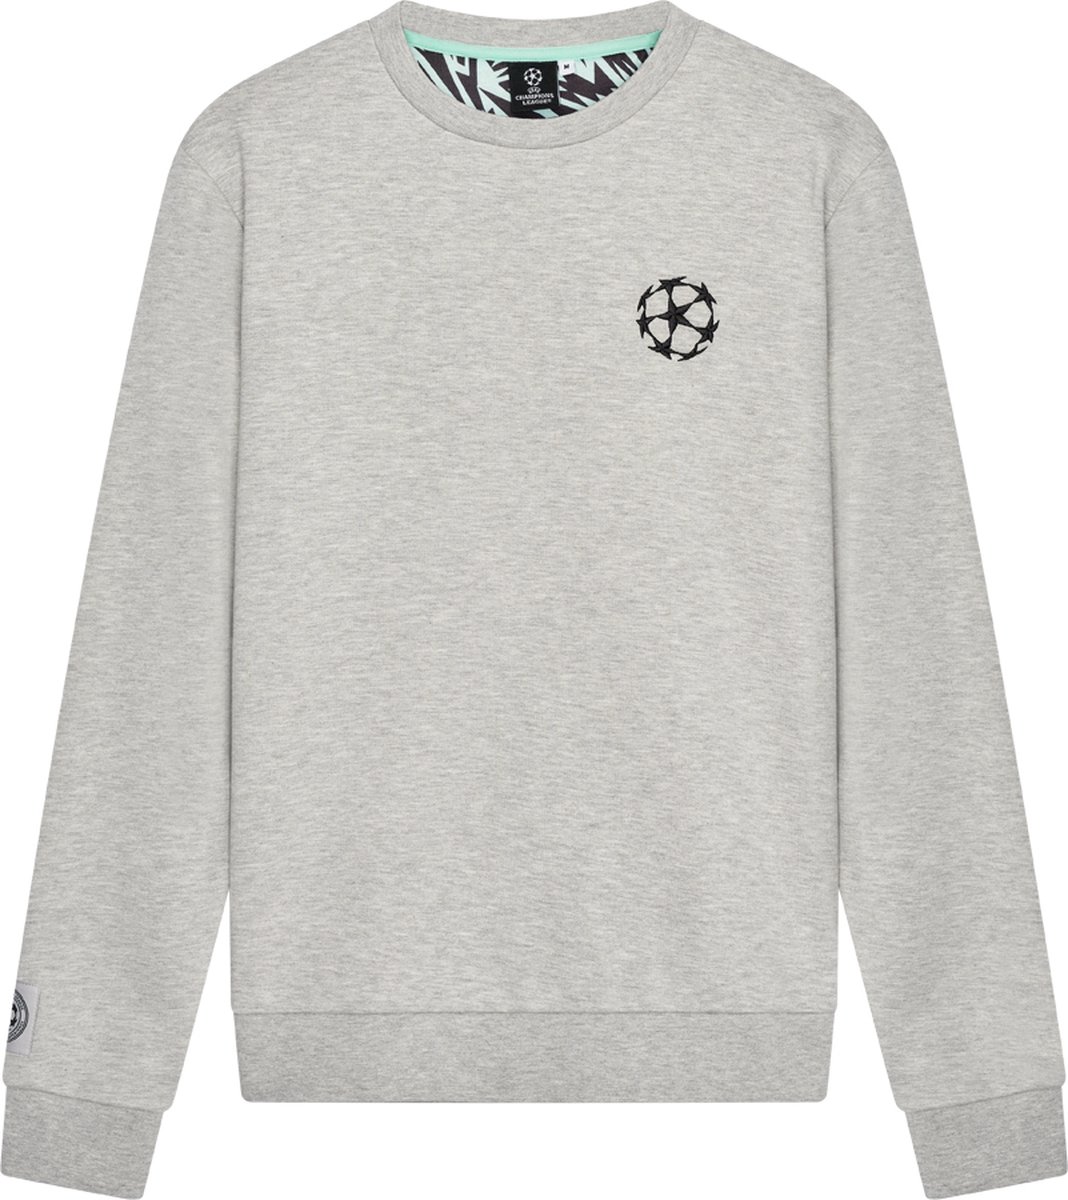 Champions League lifestyle sweater - maat XL